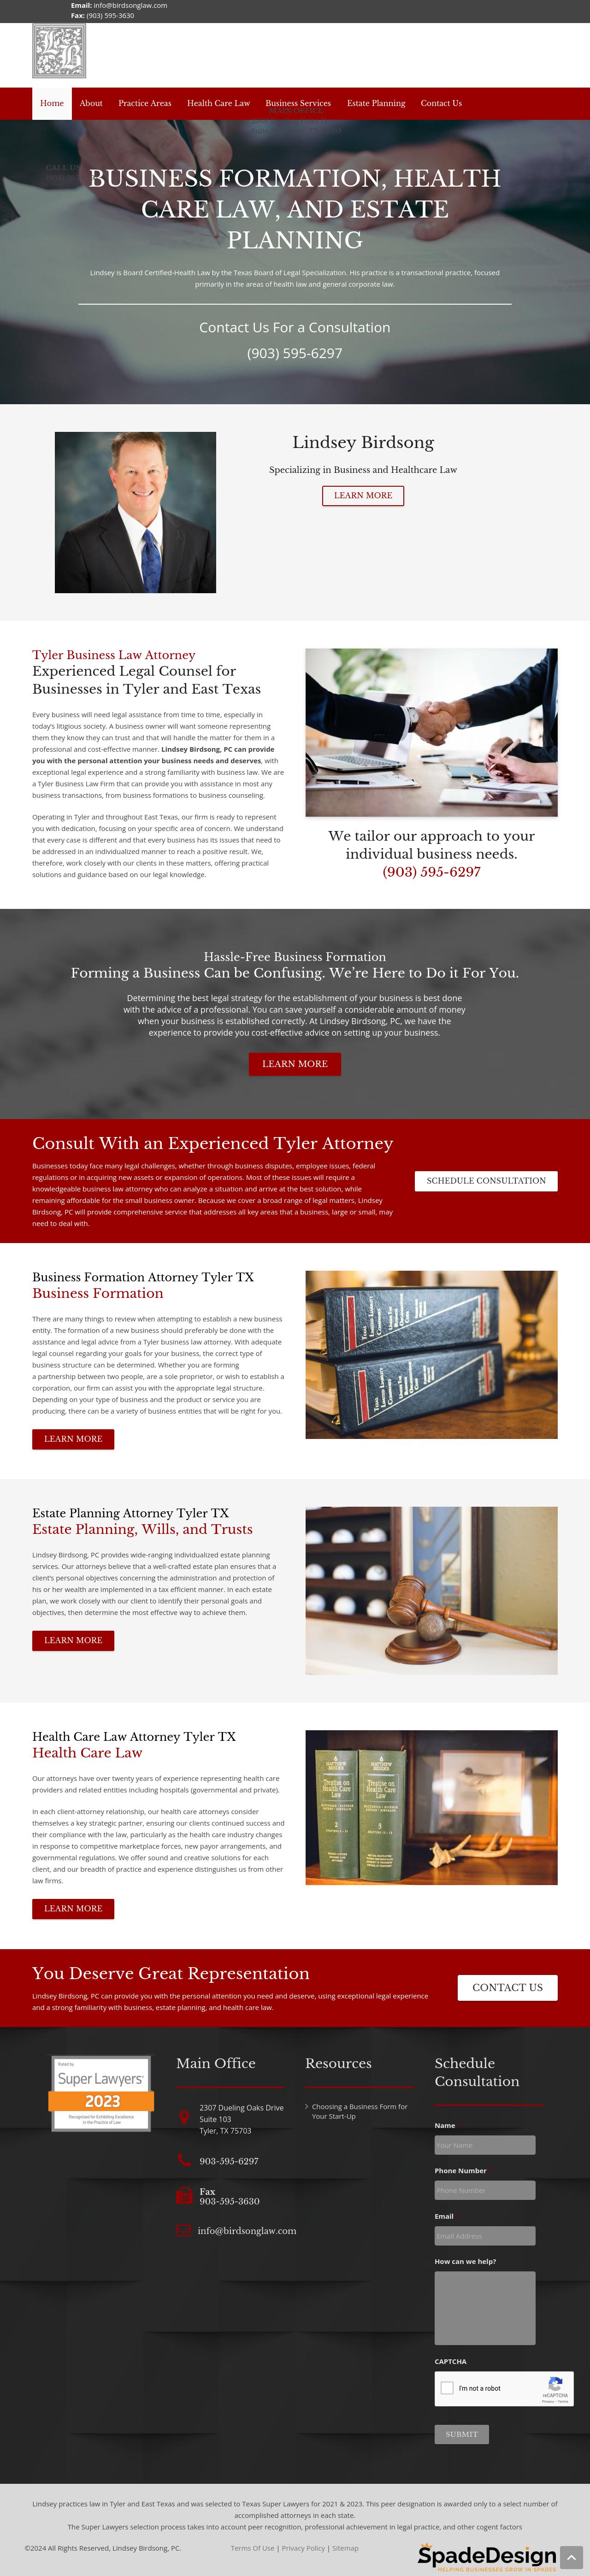 Birdsong & Armstrong, P.C. - Dallas TX Lawyers